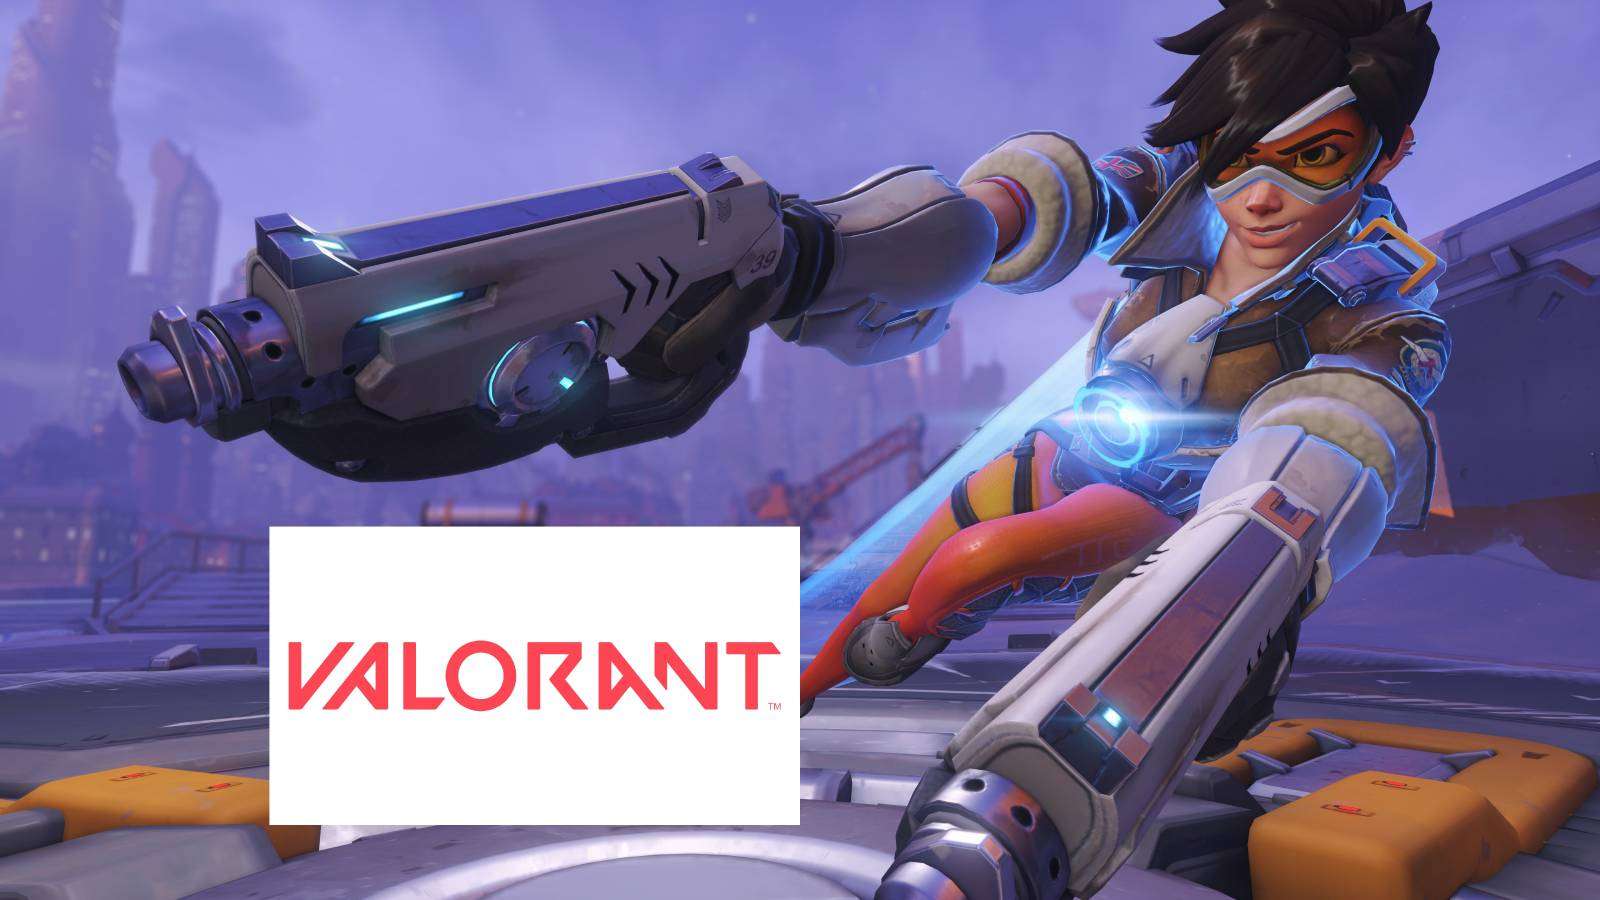 Overwatch's Tracer with the Valorant logo in the bottom corner